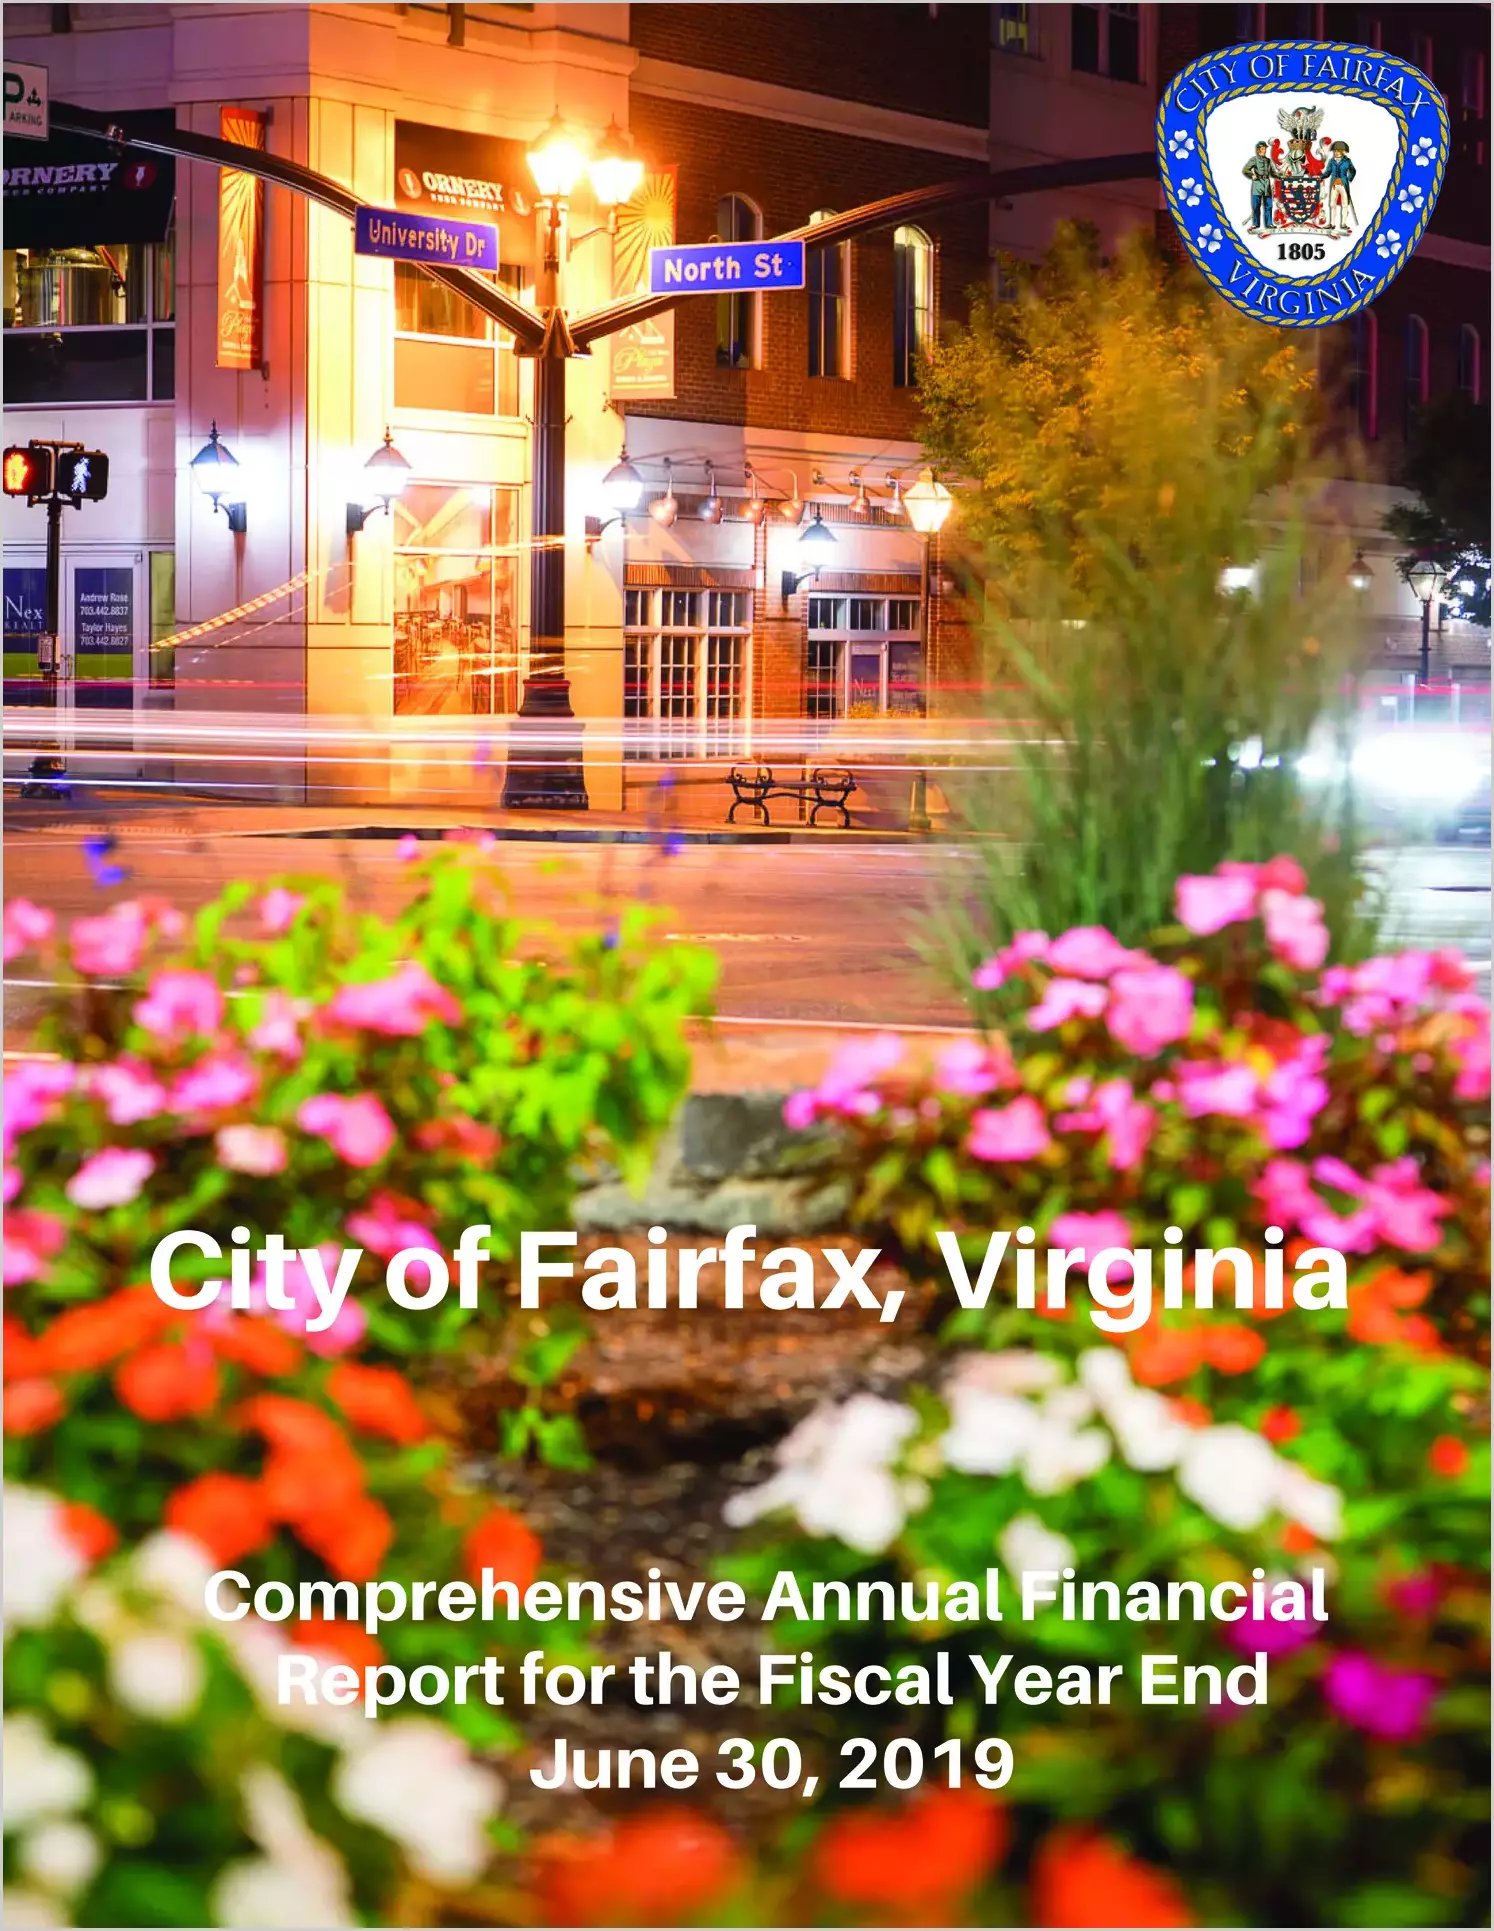 2019 Annual Financial Report for City of Fairfax